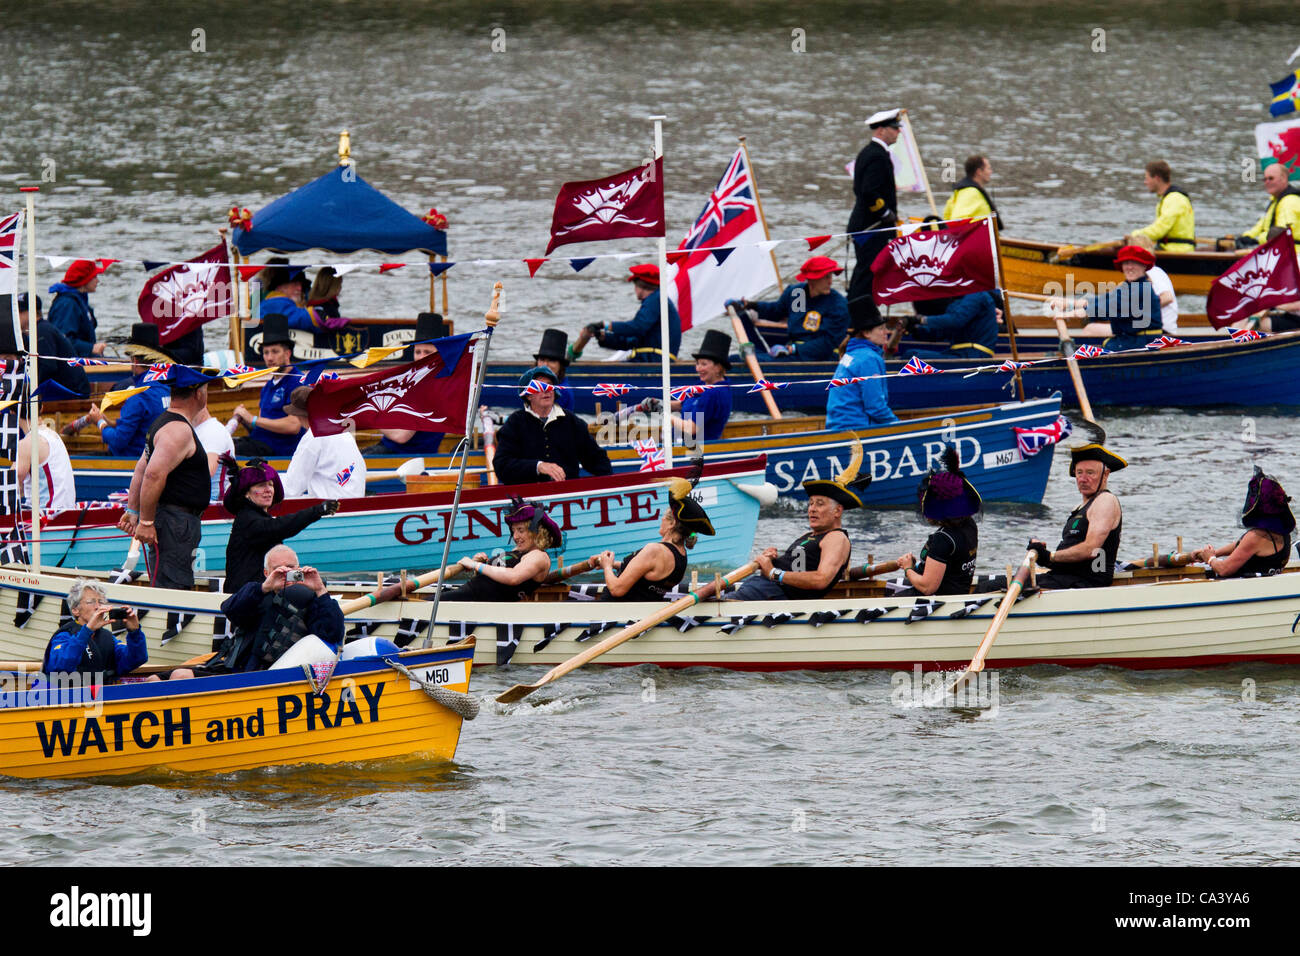 LONDON, UK, 3rd June 2012. Many boats pass as part of the diamond jubilee pageant. Stock Photo